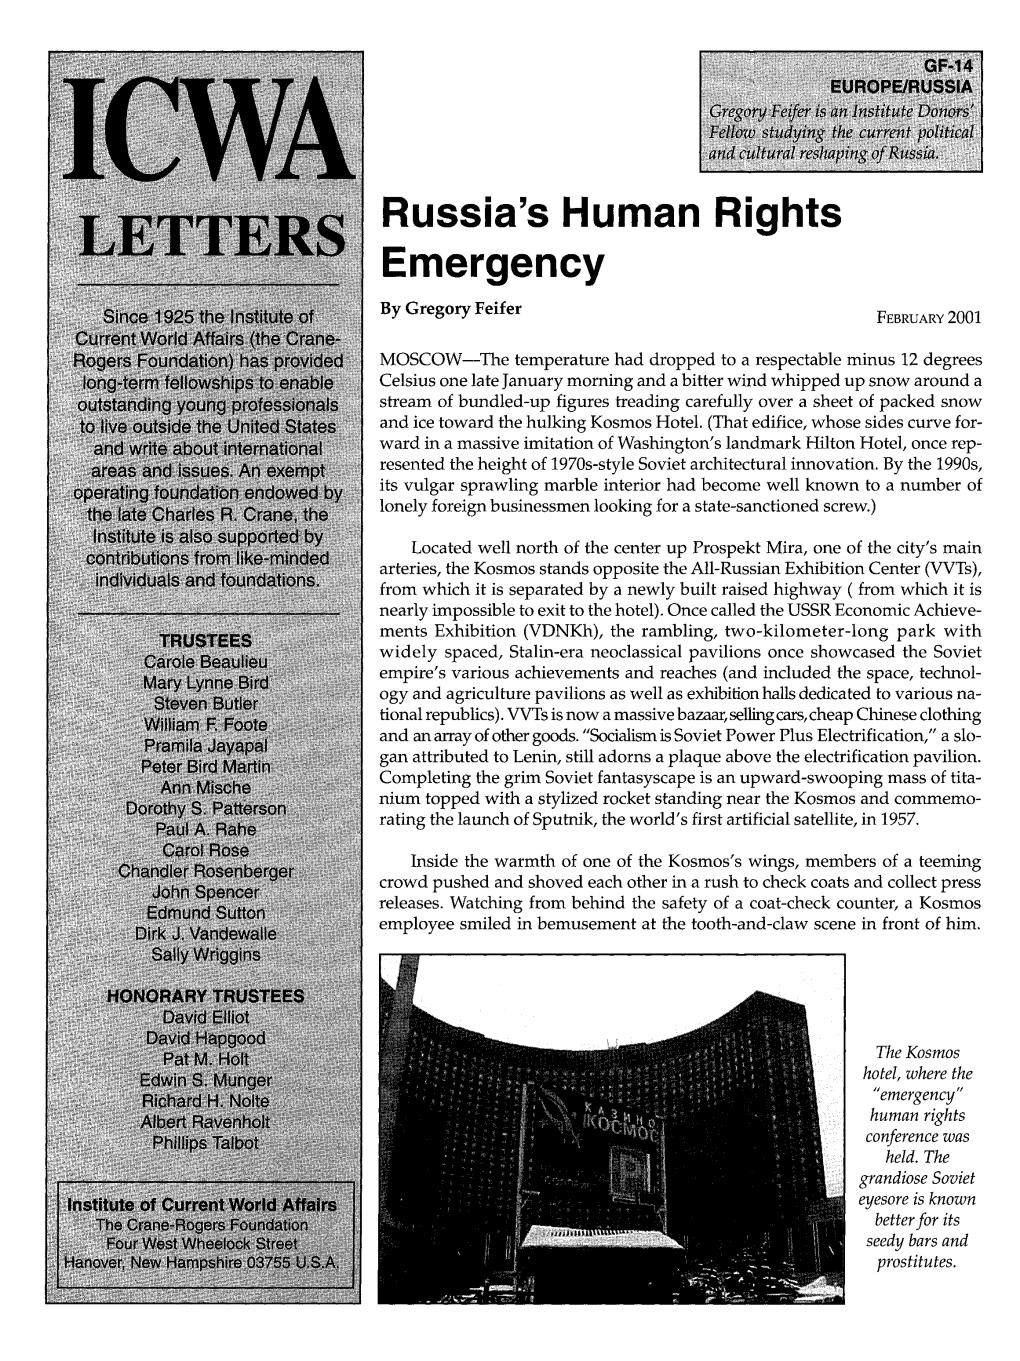 Russia's Human Rights Emergency